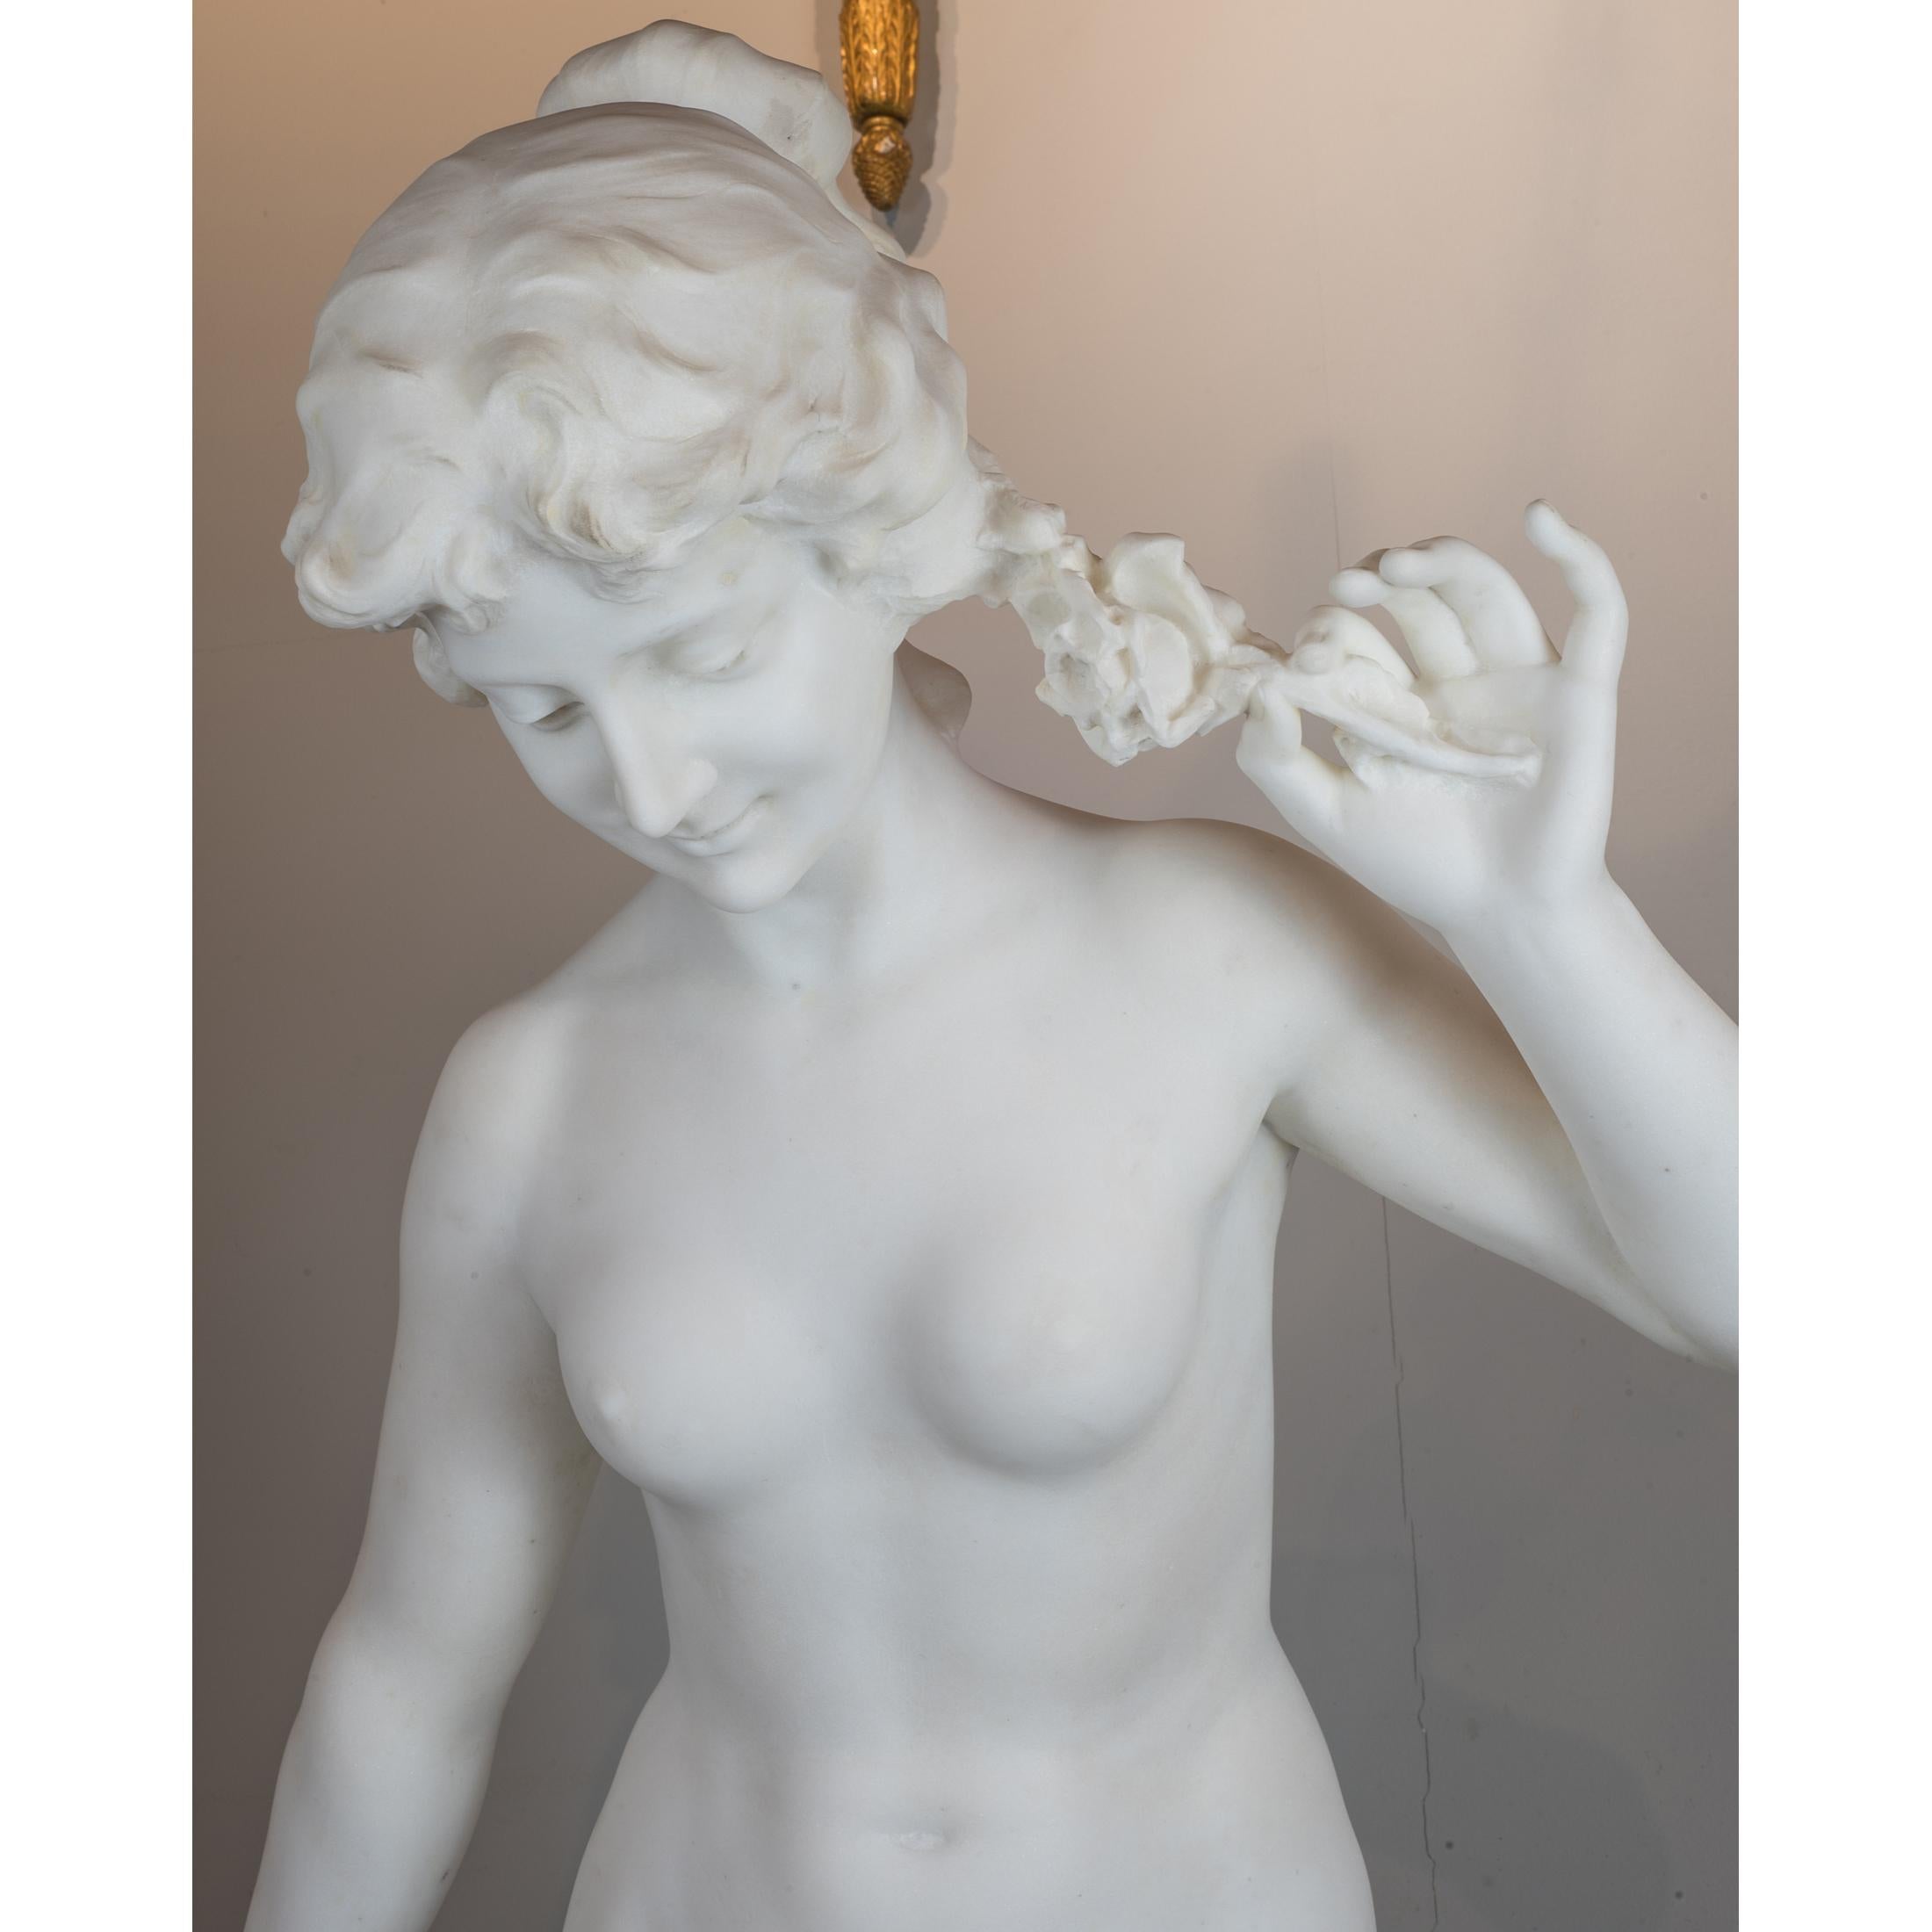 19th Century White Marble Statue of a Woman by Aristide Petrilli For Sale